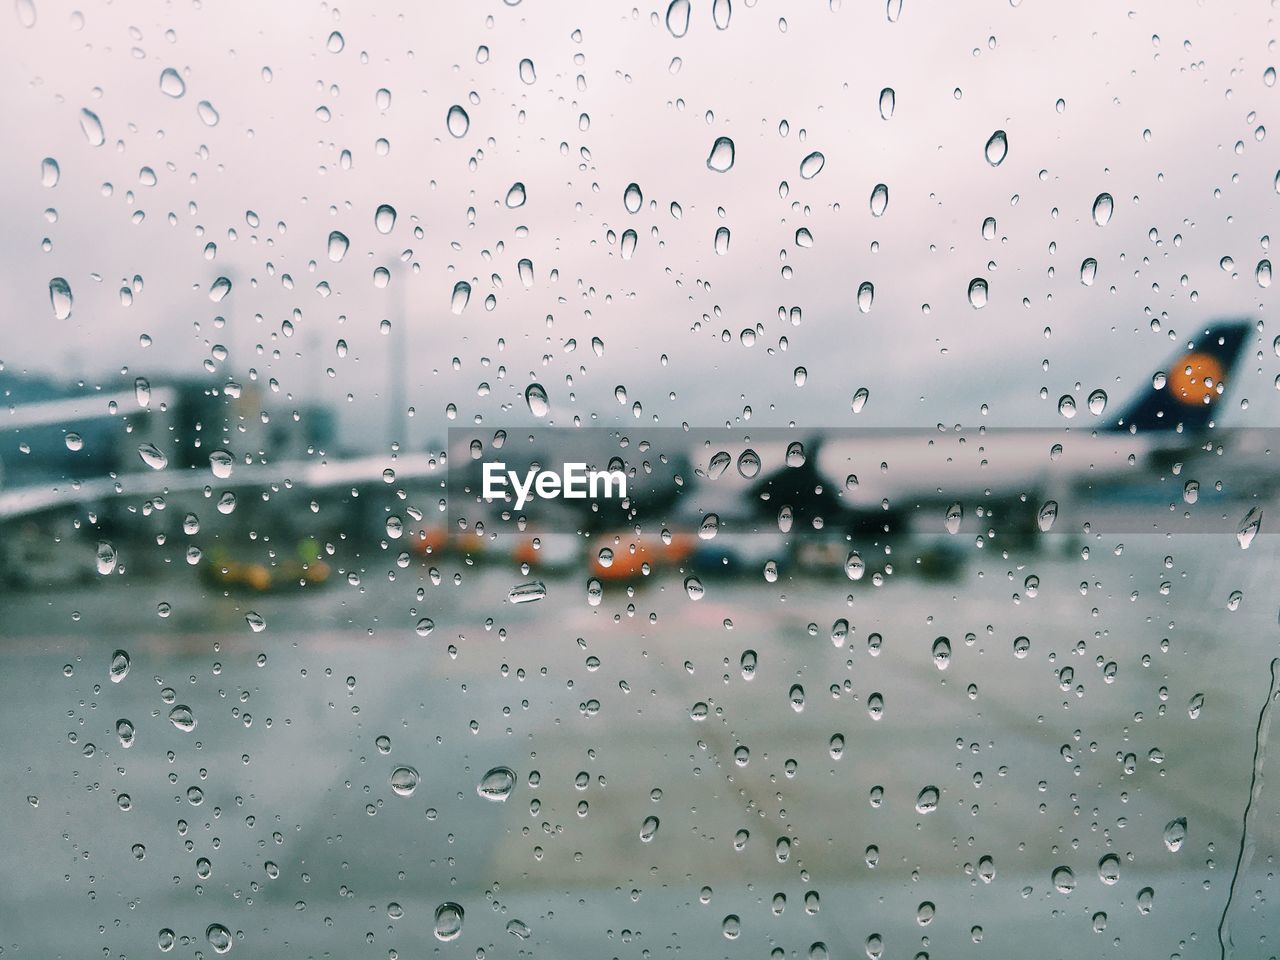 Airplane on airport runway seen through wet glass window during monsoon